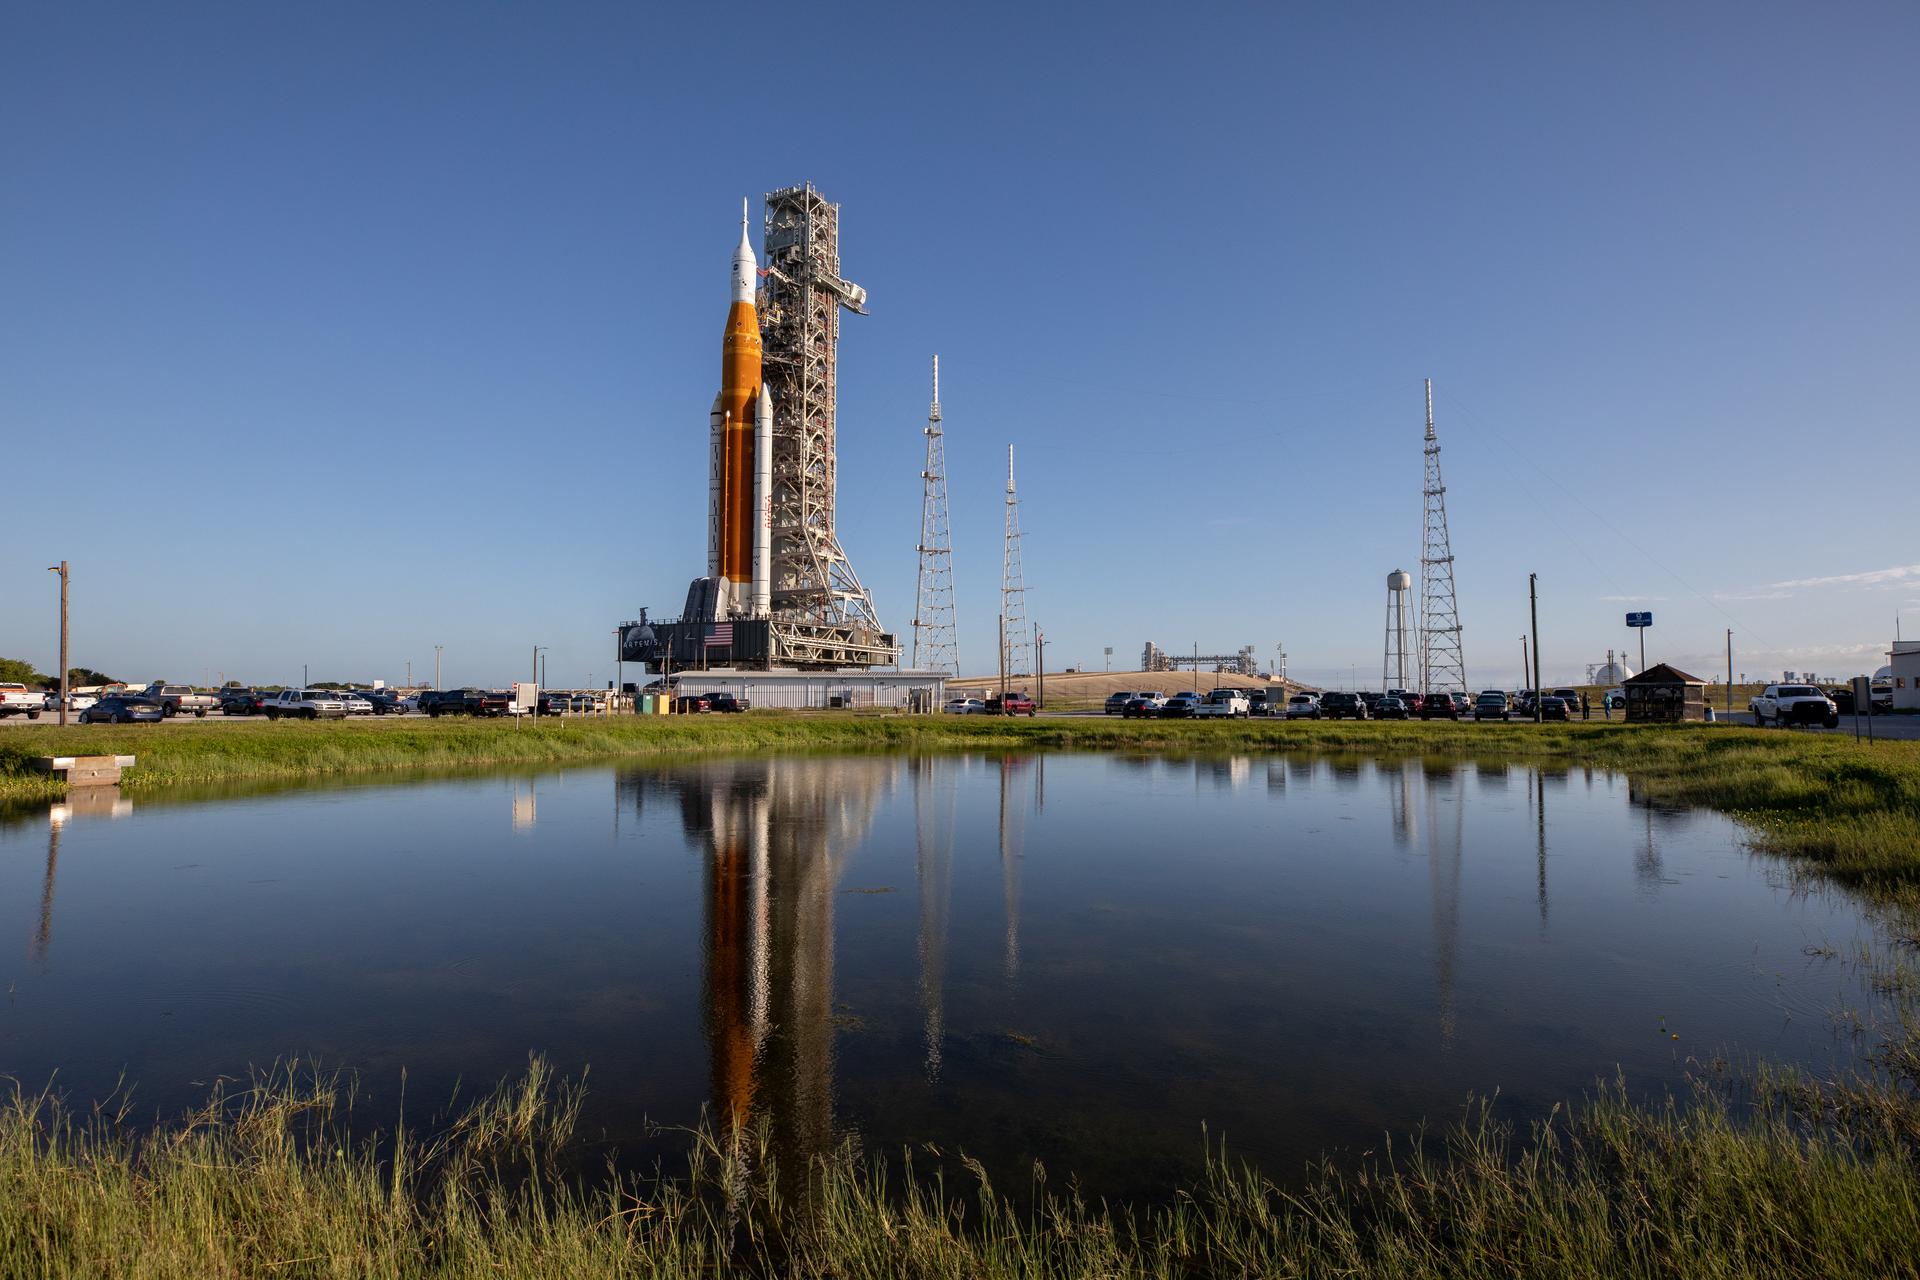 NASA’s Artemis I Moon rocke approaches Launch Pad 39B at the agency’s Kennedy Space Center on June 6.